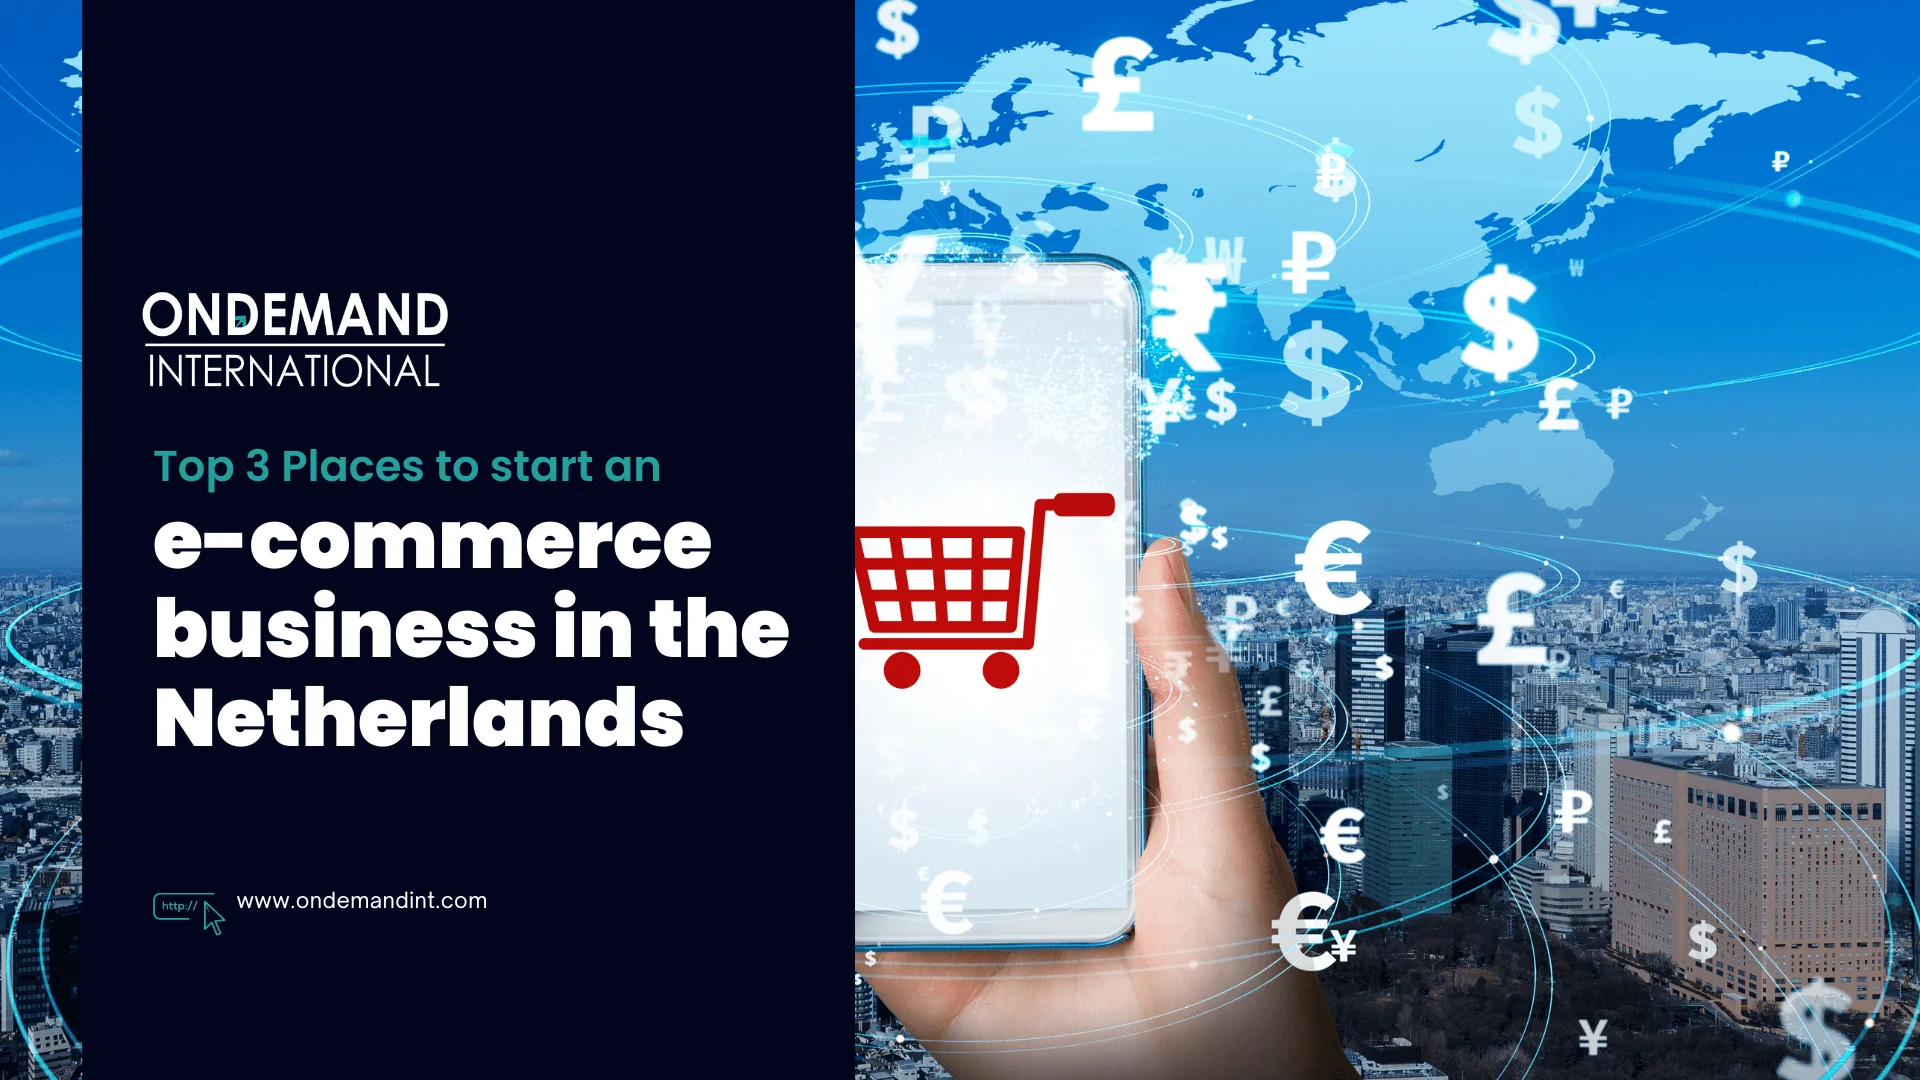 Top Places to Start an E-Commerce Business in the Netherlands: 3 Key Business Locations